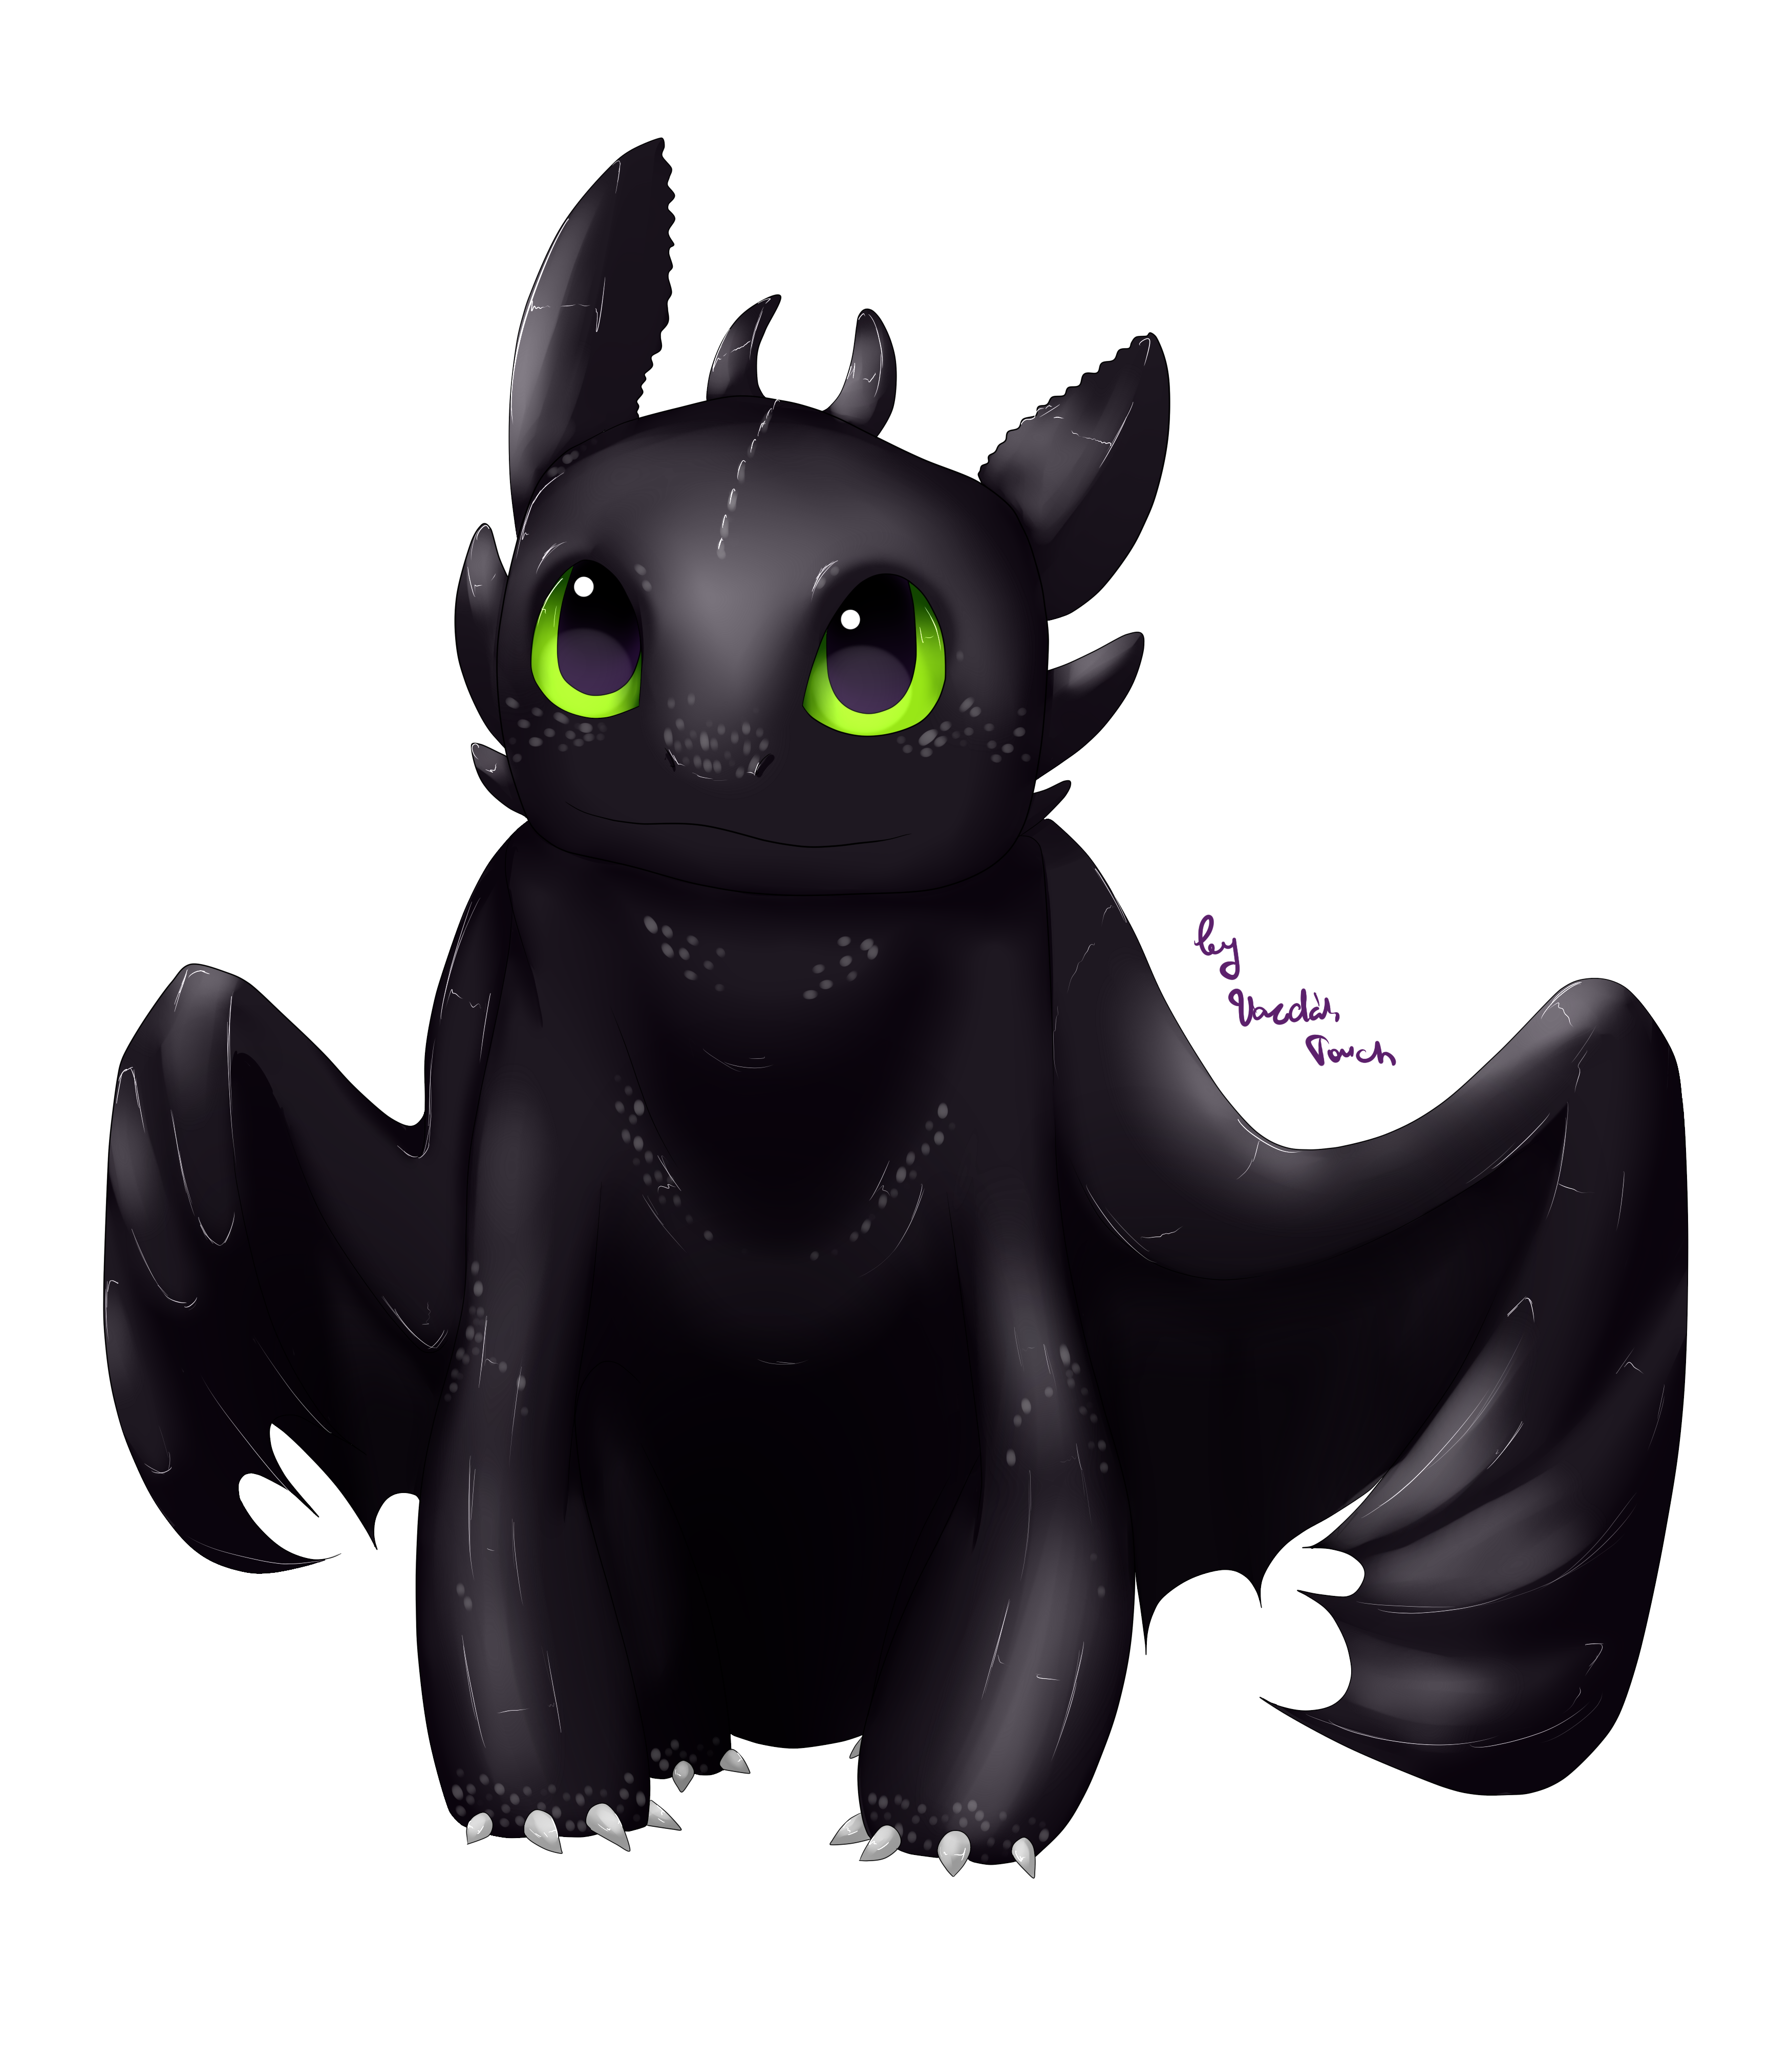 .Toothless HTTYD. by VardasTouch on DeviantArt